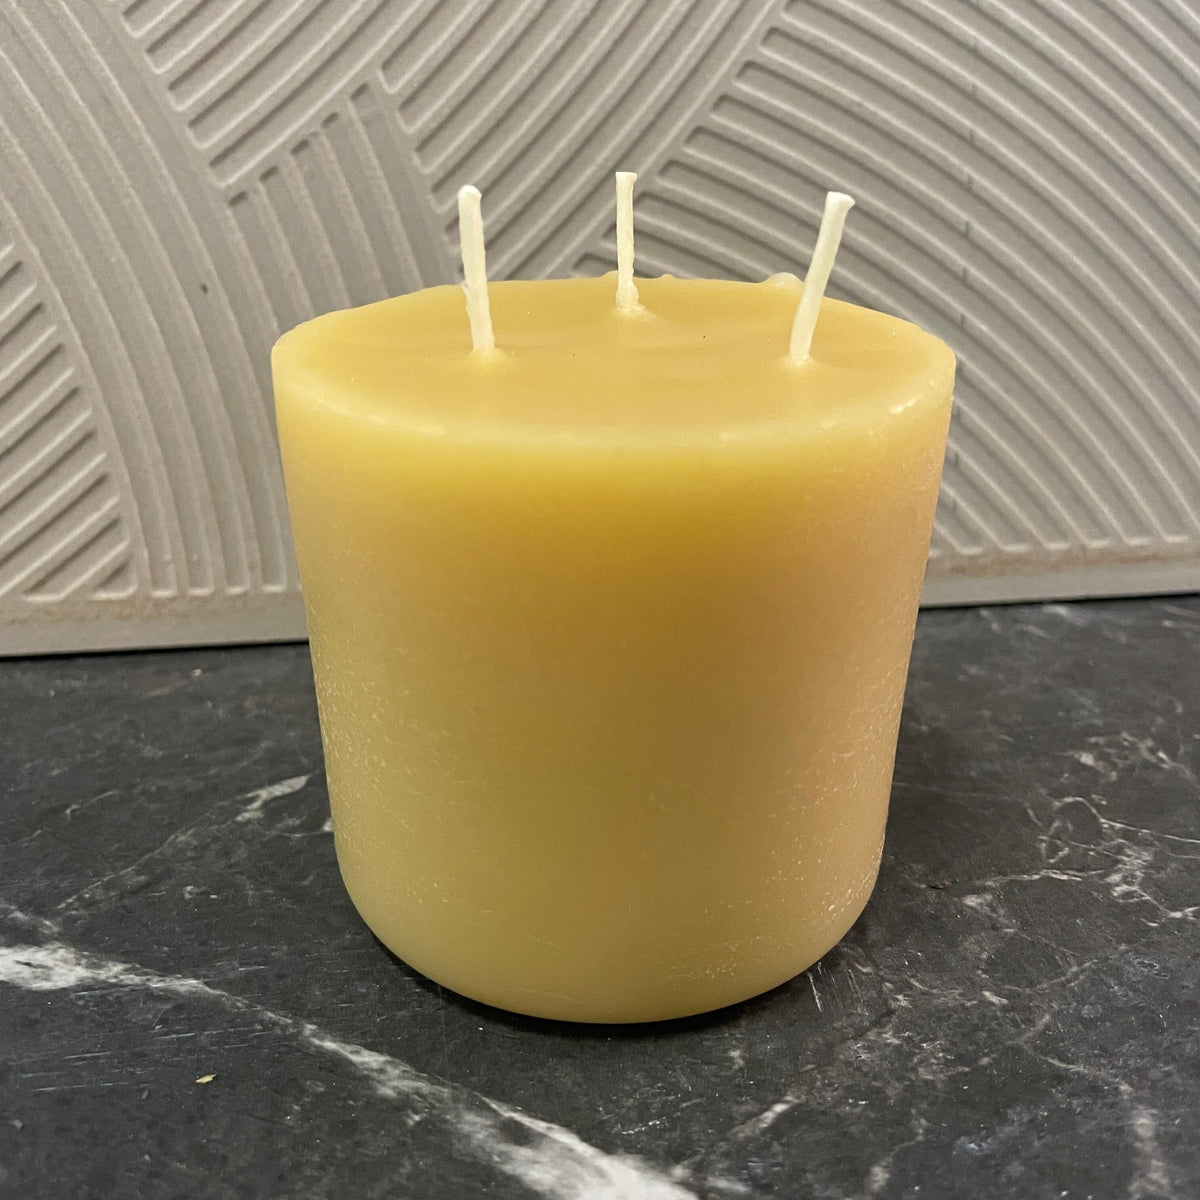 Refill for triple wick candle in glass Happy Flame Refill - conventional beeswax triple wick candle (no holder) $35.50 